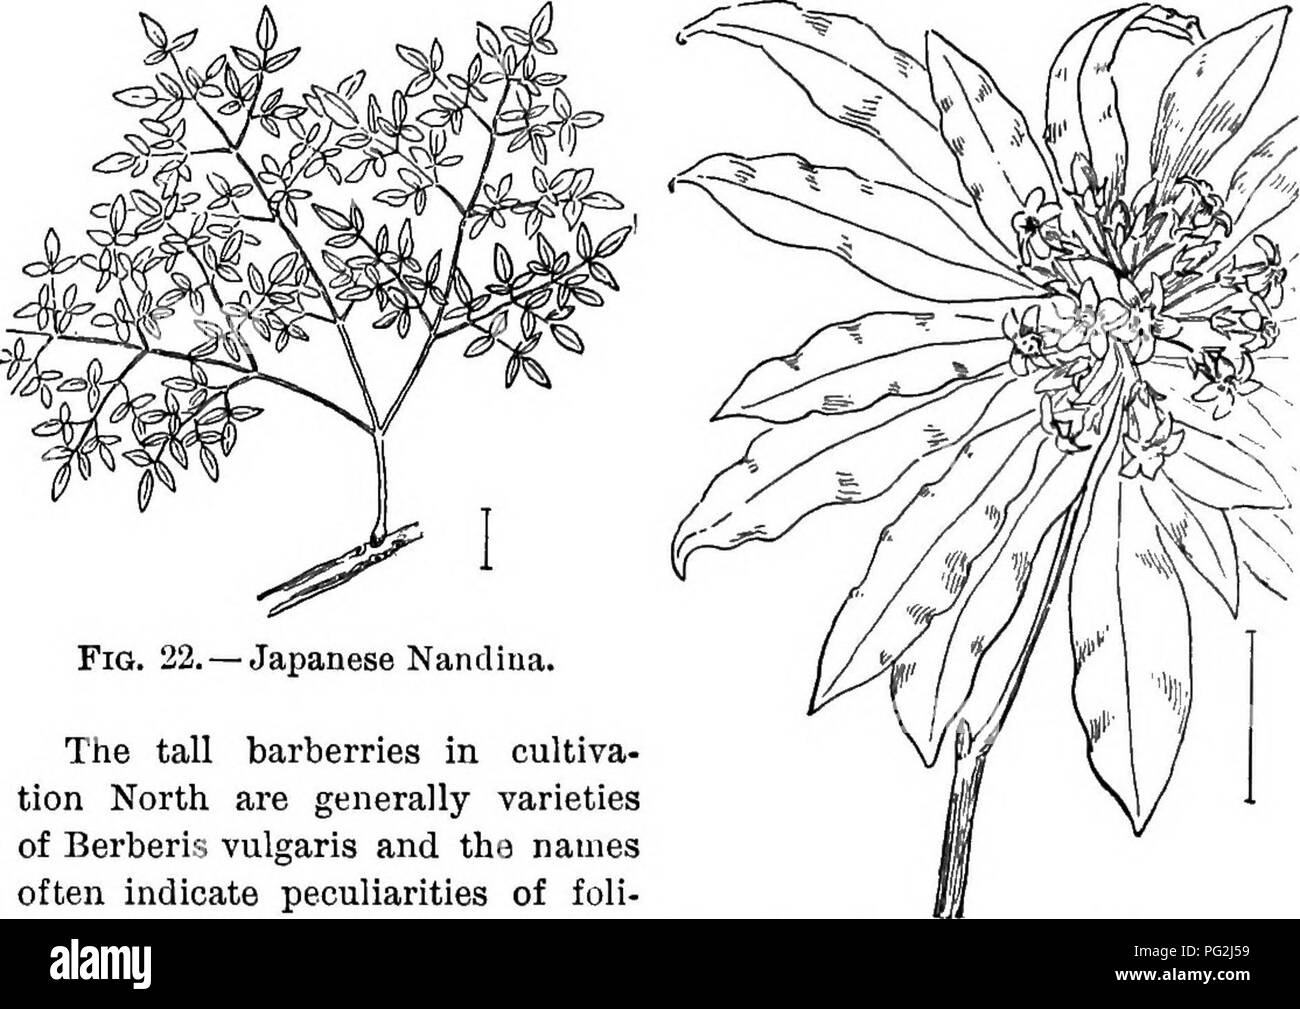 . Ornamental shrubs of the United States (hardy, cultivated). Shrubs. NANDINA 67 C. Blades 5-9, shiny dark green above with many teeth ; height 3-6 feet. Holly-leaved Mahonia (14)—Mahonia Aquifolium. C. Blades 11-21, with 3-5 basal ribs and few teeth; low. Ash Mahonia (21) — Mahonia nerv6sa. C. Blades 3-7, dull, pale; low, almost creeping, 1-2 feet high. Trailing Mahonia — Mahonia rfepens (Berberis Aquif61ium). B. Blades 5-9, tapering at base with many spiny teeth; low. For- tune's Mahonia. Mahonia Foitiinei.. Fig. 22.- The tall barberries in cultiva- tion North are generally varieties of Berb Stock Photo